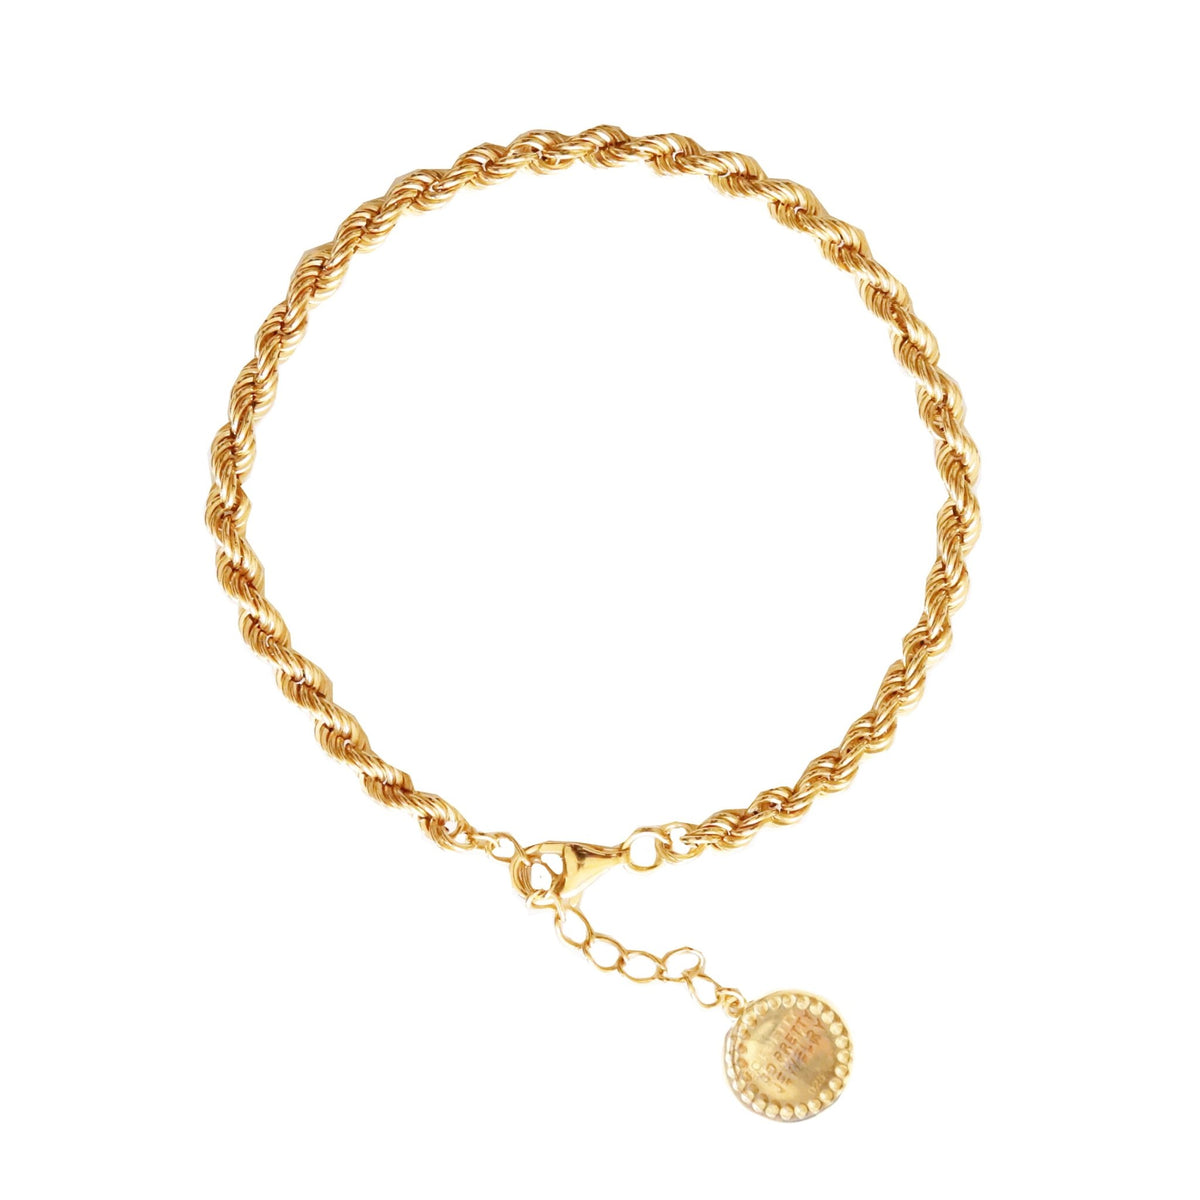 FEARLESS TWISTED ROPE CHAIN BRACELET - GOLD - SO PRETTY CARA COTTER